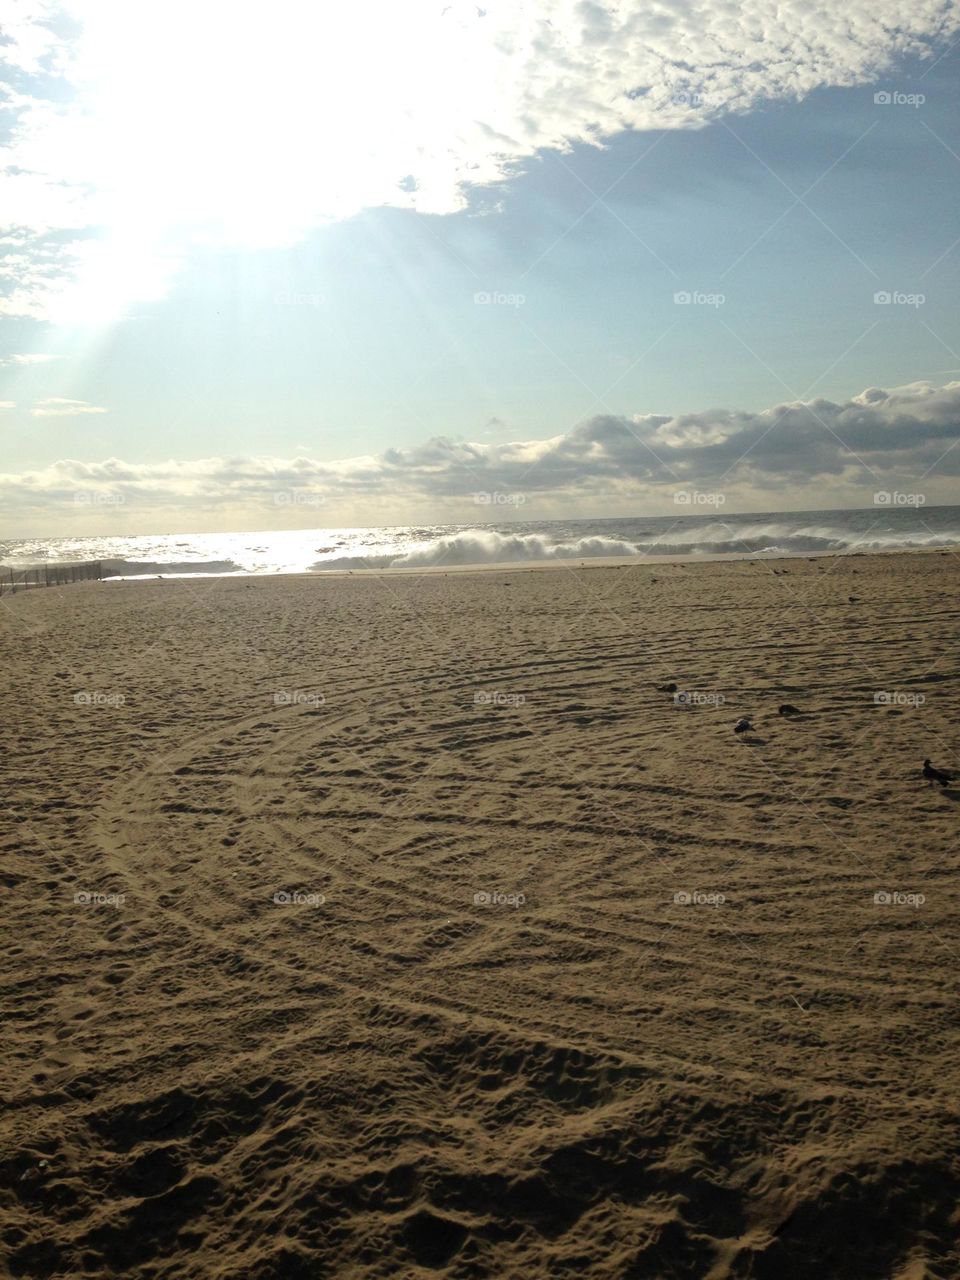 A sandy beach with circular tracks in it underneath a partly cloudy September sky. The whitecaps in the water resemble the clouds above, and a bit of sun peaks through and reflects on the water. Taken in Point Pleasant Beach, NJ. 